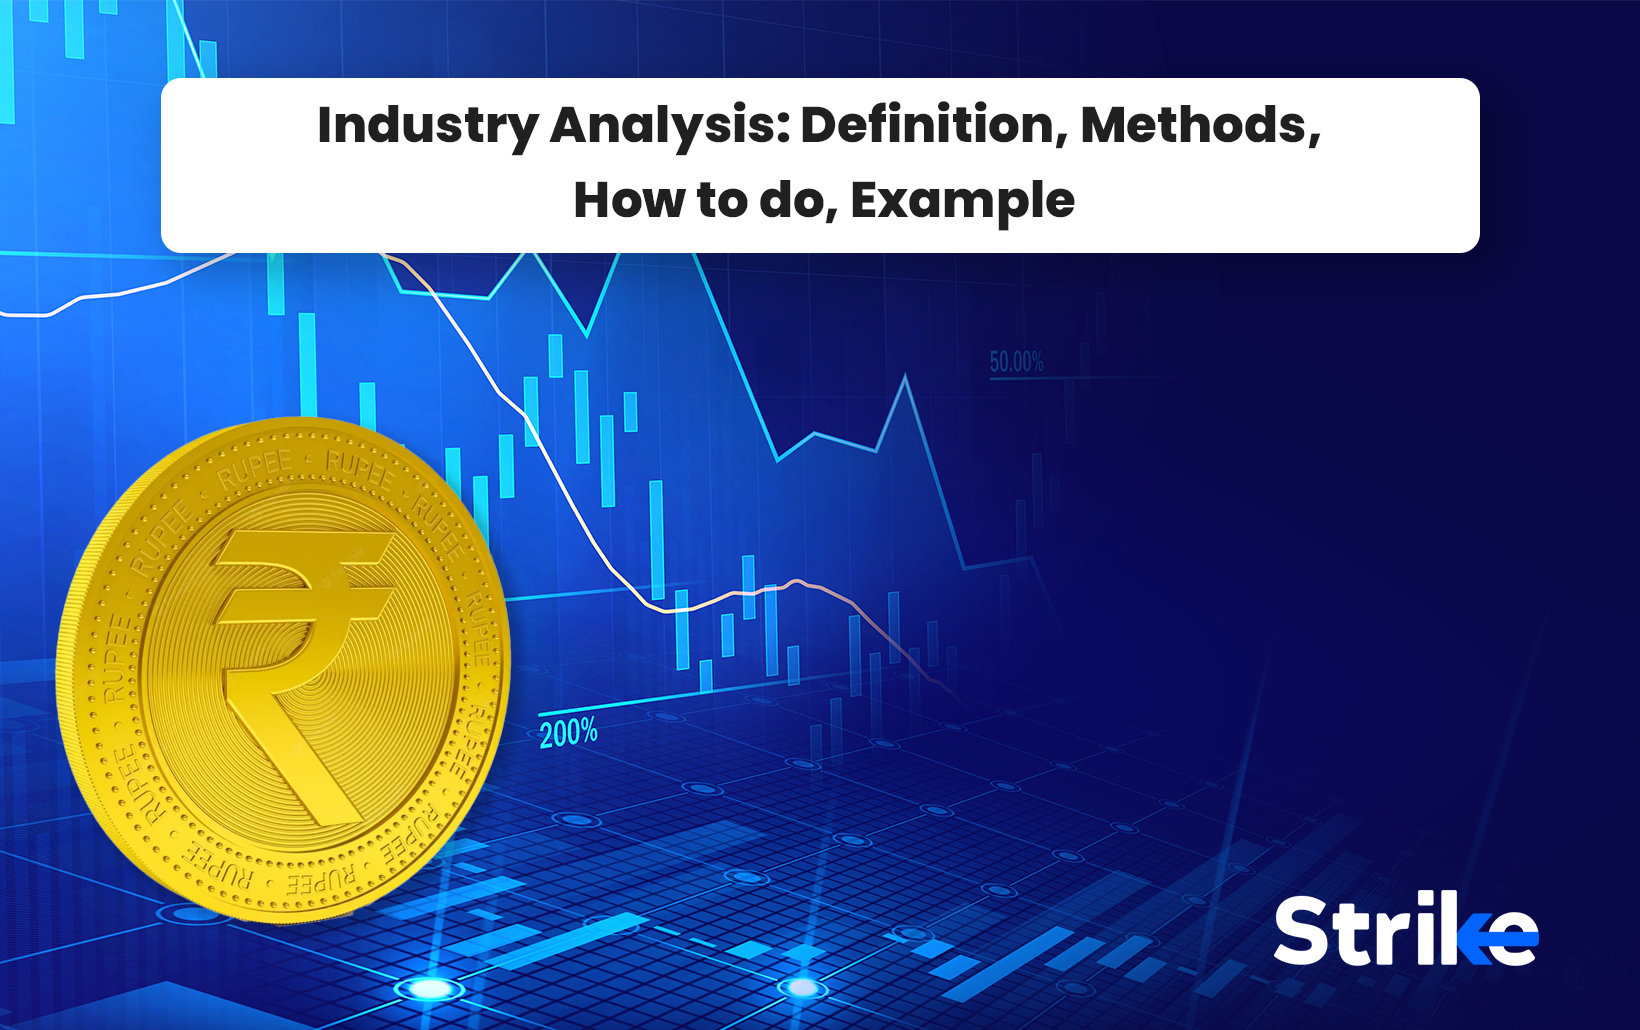 Industry Analysis: Definition, Methods, How to Do, Example